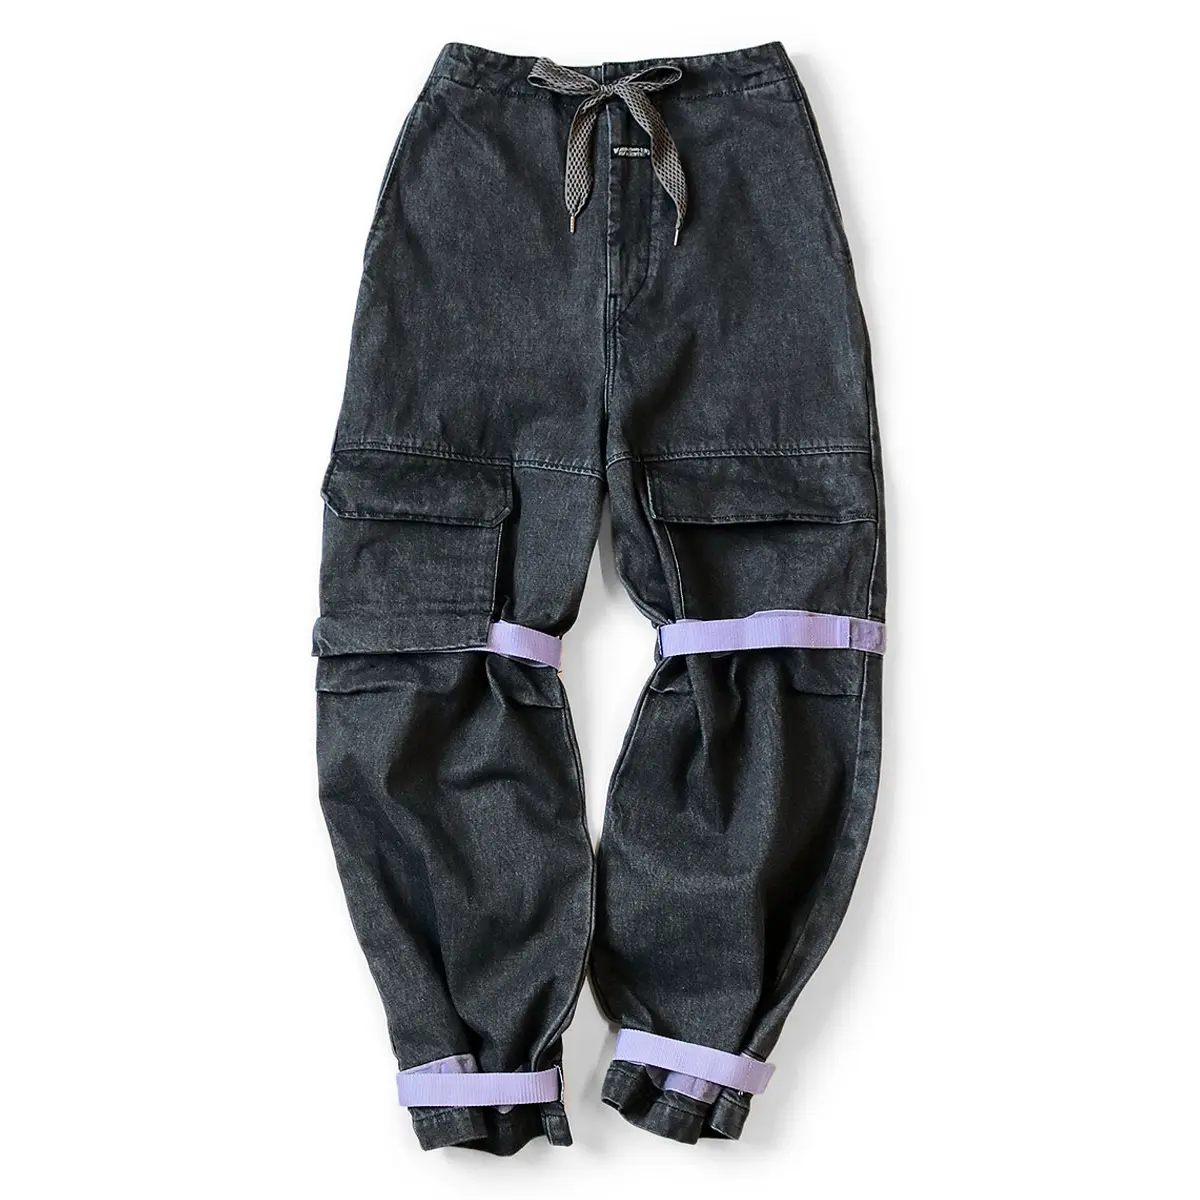 ZhuoYang Garment Men's Gothic Pants Breathable Sustainable High Quality Cotton Material Gothic Purple Brand Jeans Pants